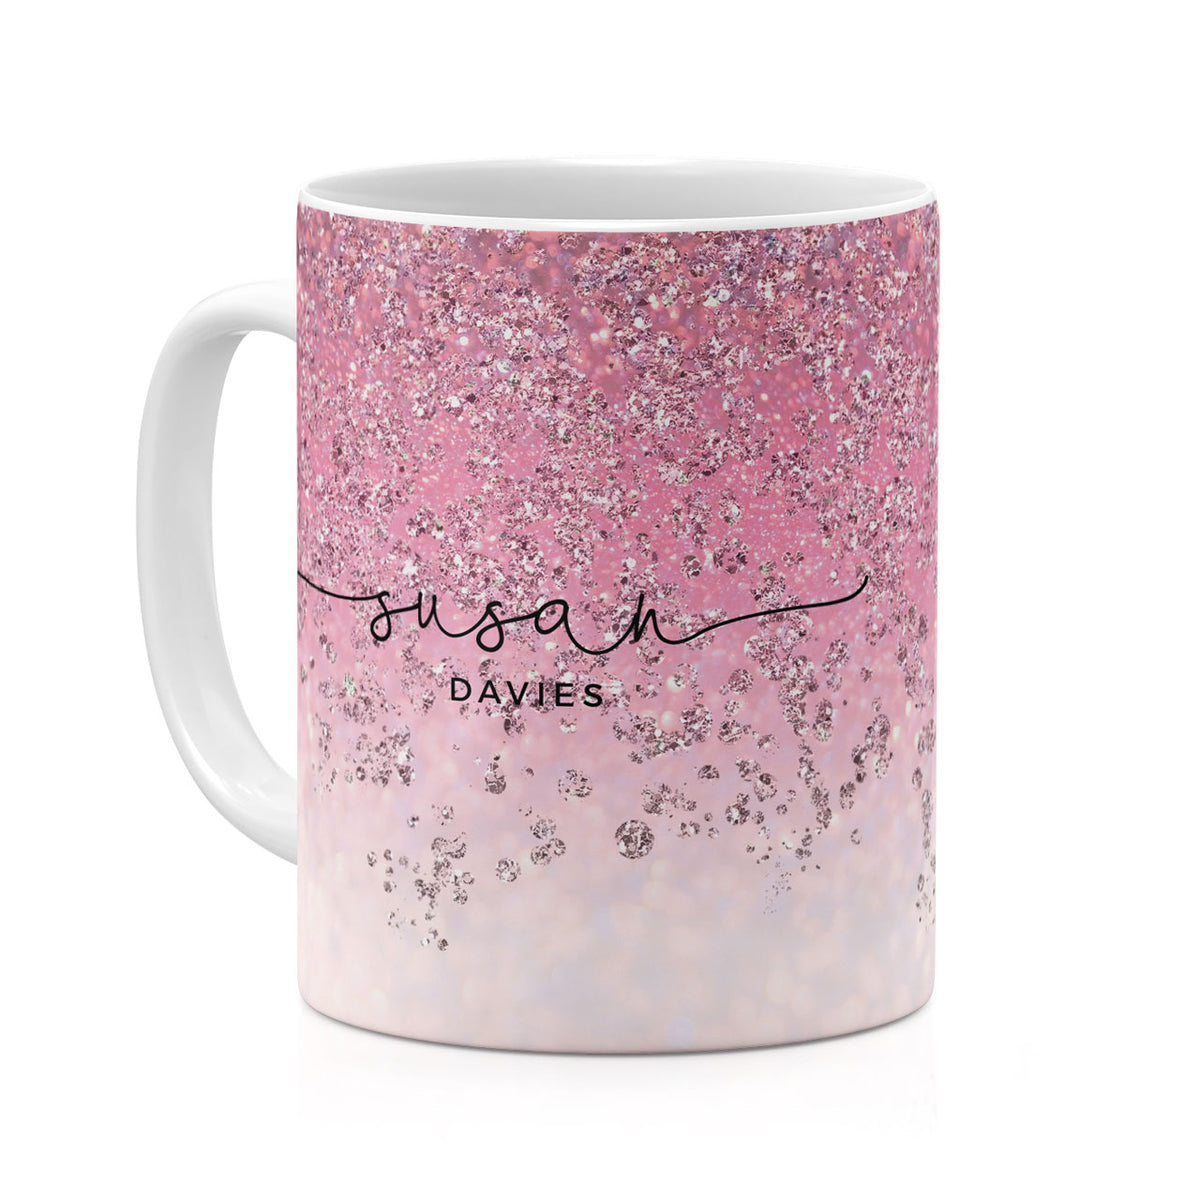 Personalised Ceramic Mug with Name Initials Text Pink Ombre Marble Silver Handwritten